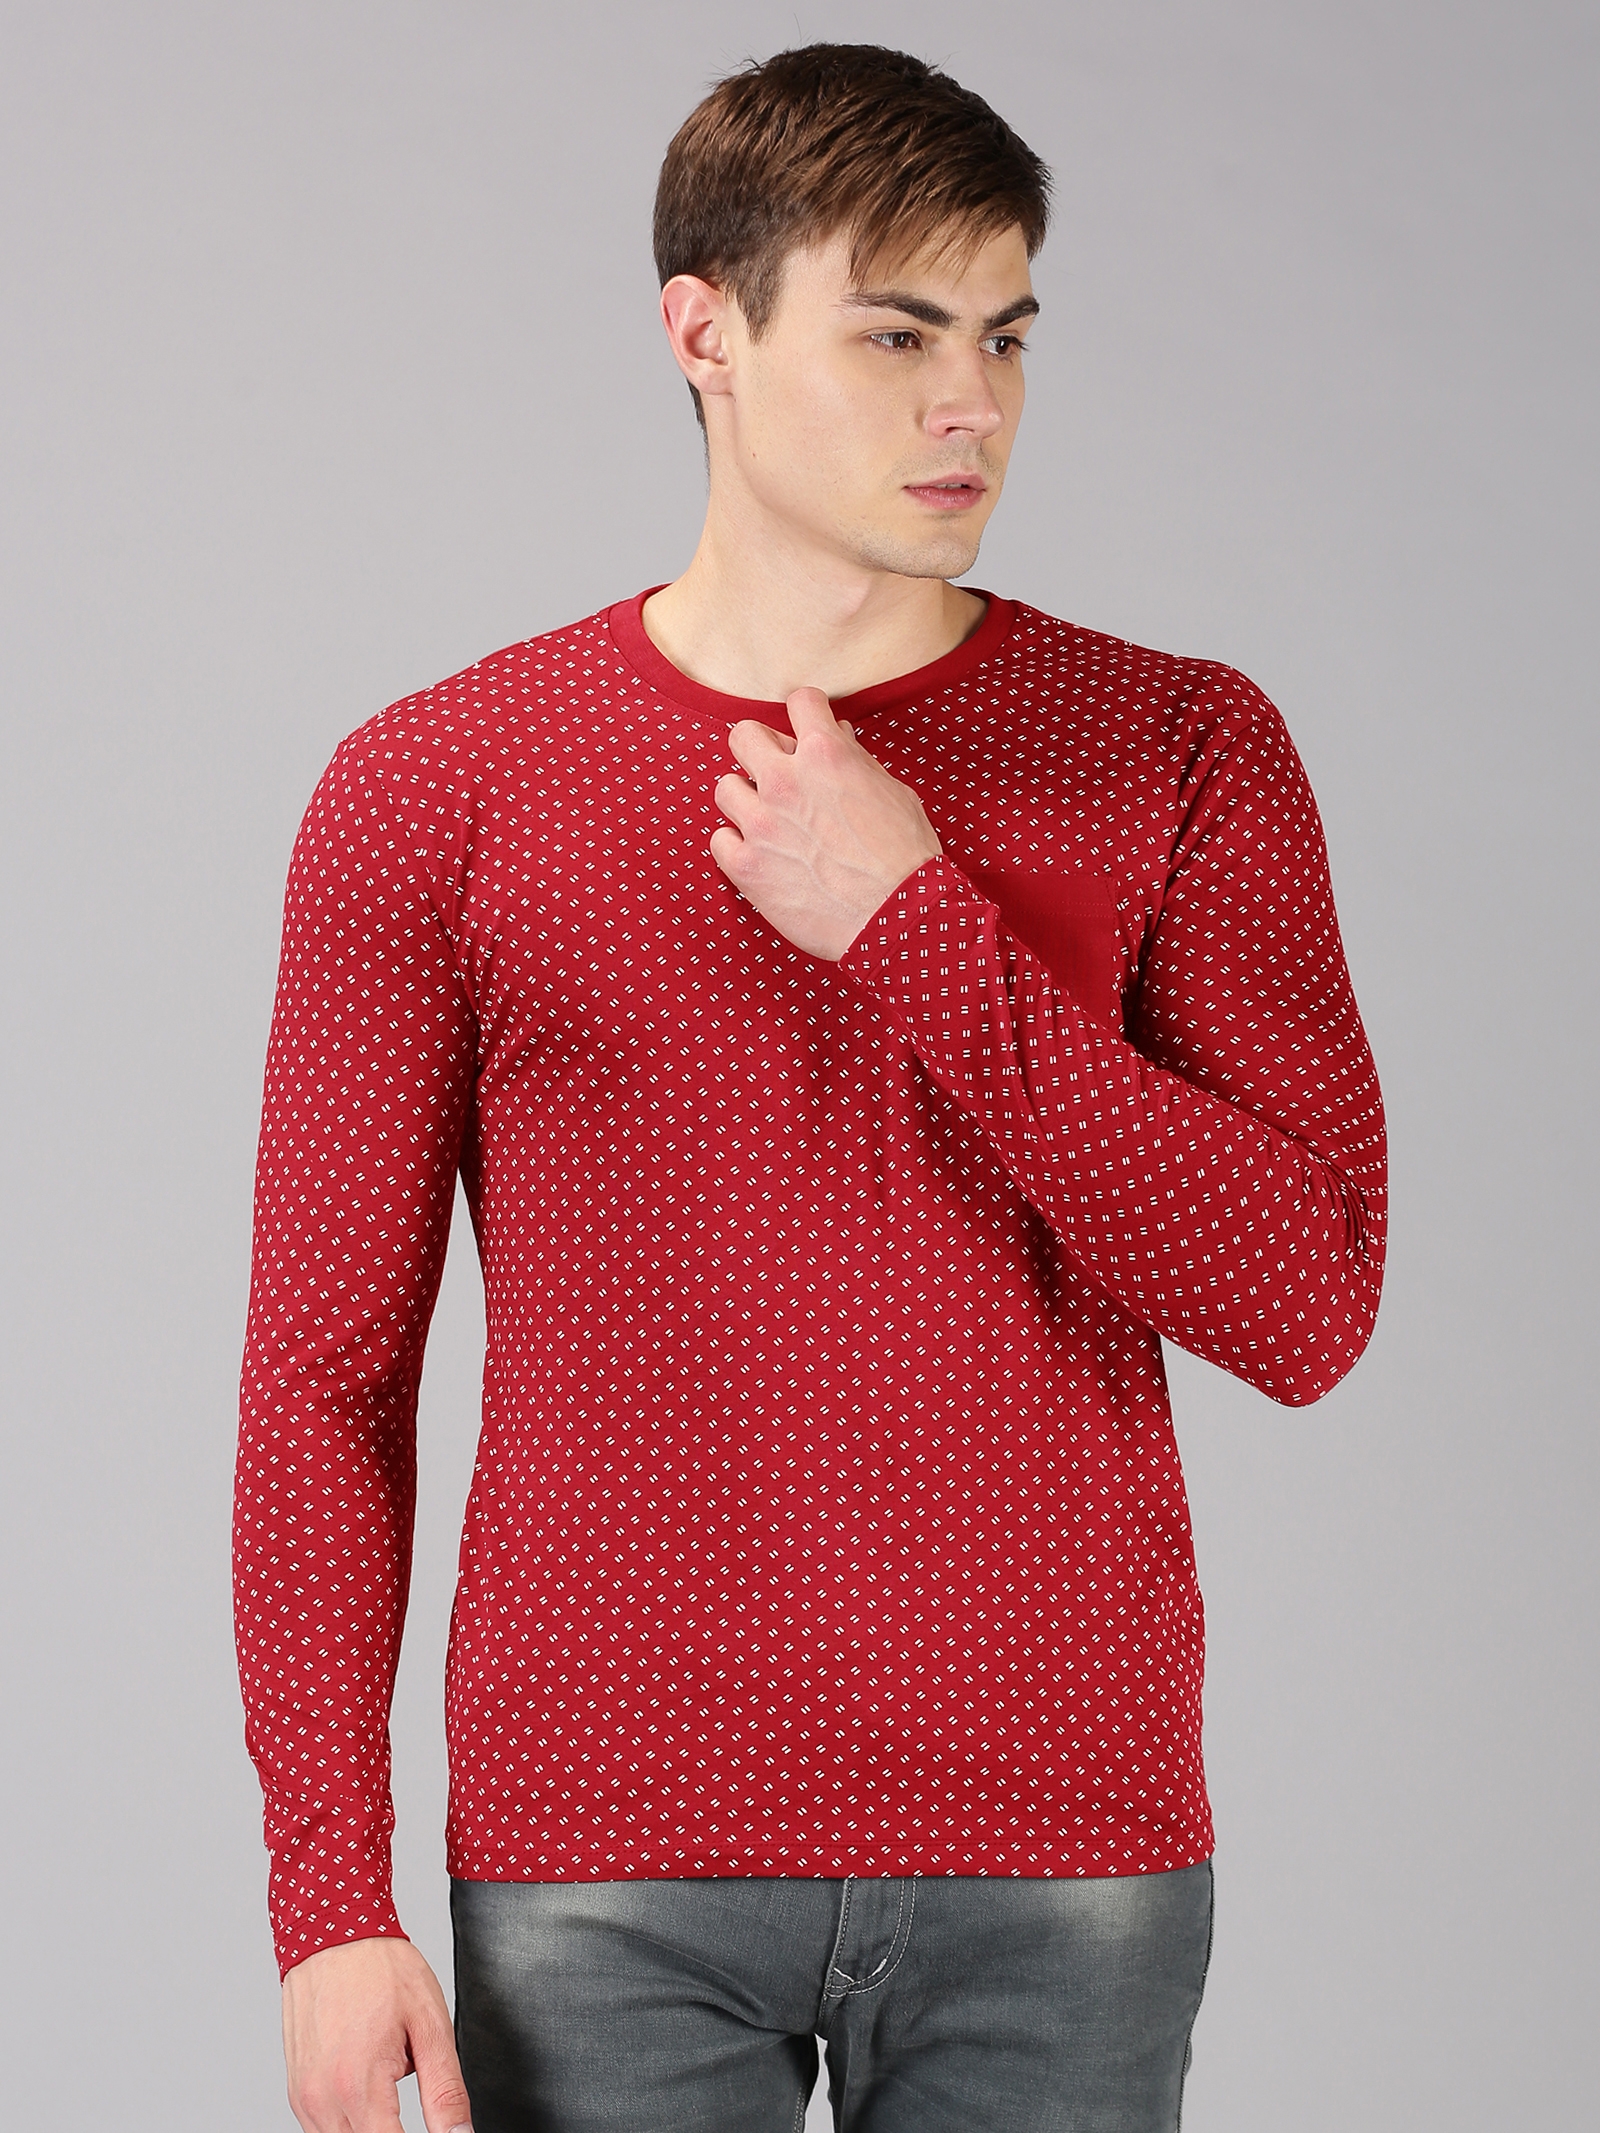 UrGear Men Red White Printed Round Neck Full Sleeve Casual T-Shirt